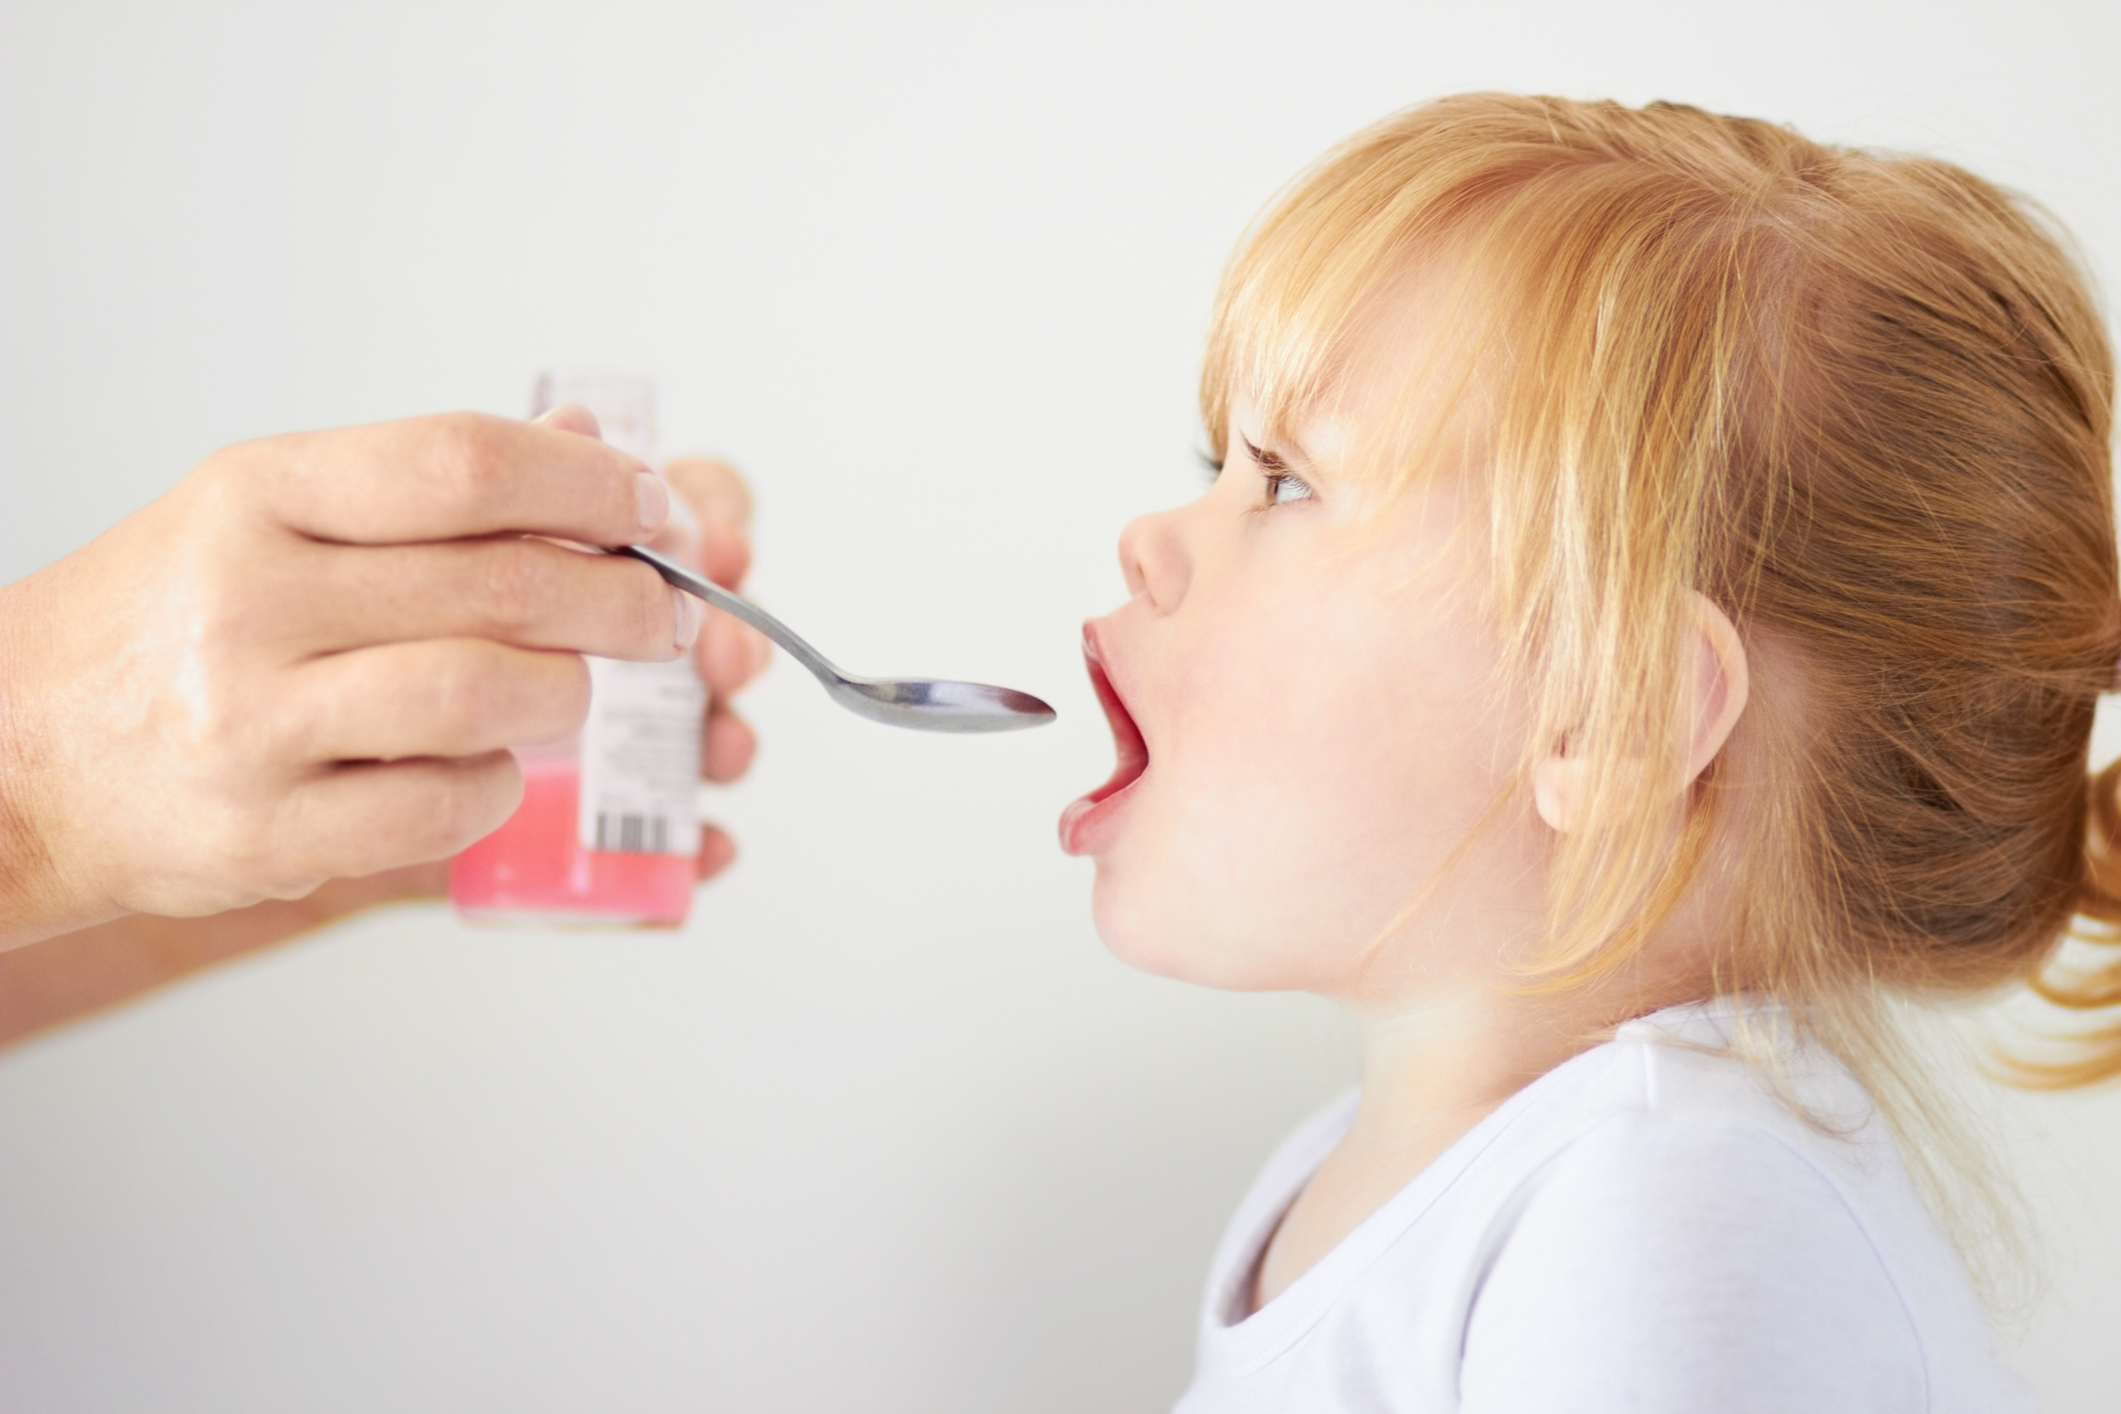 Daycare medication administration for a baby girl in Louisiana